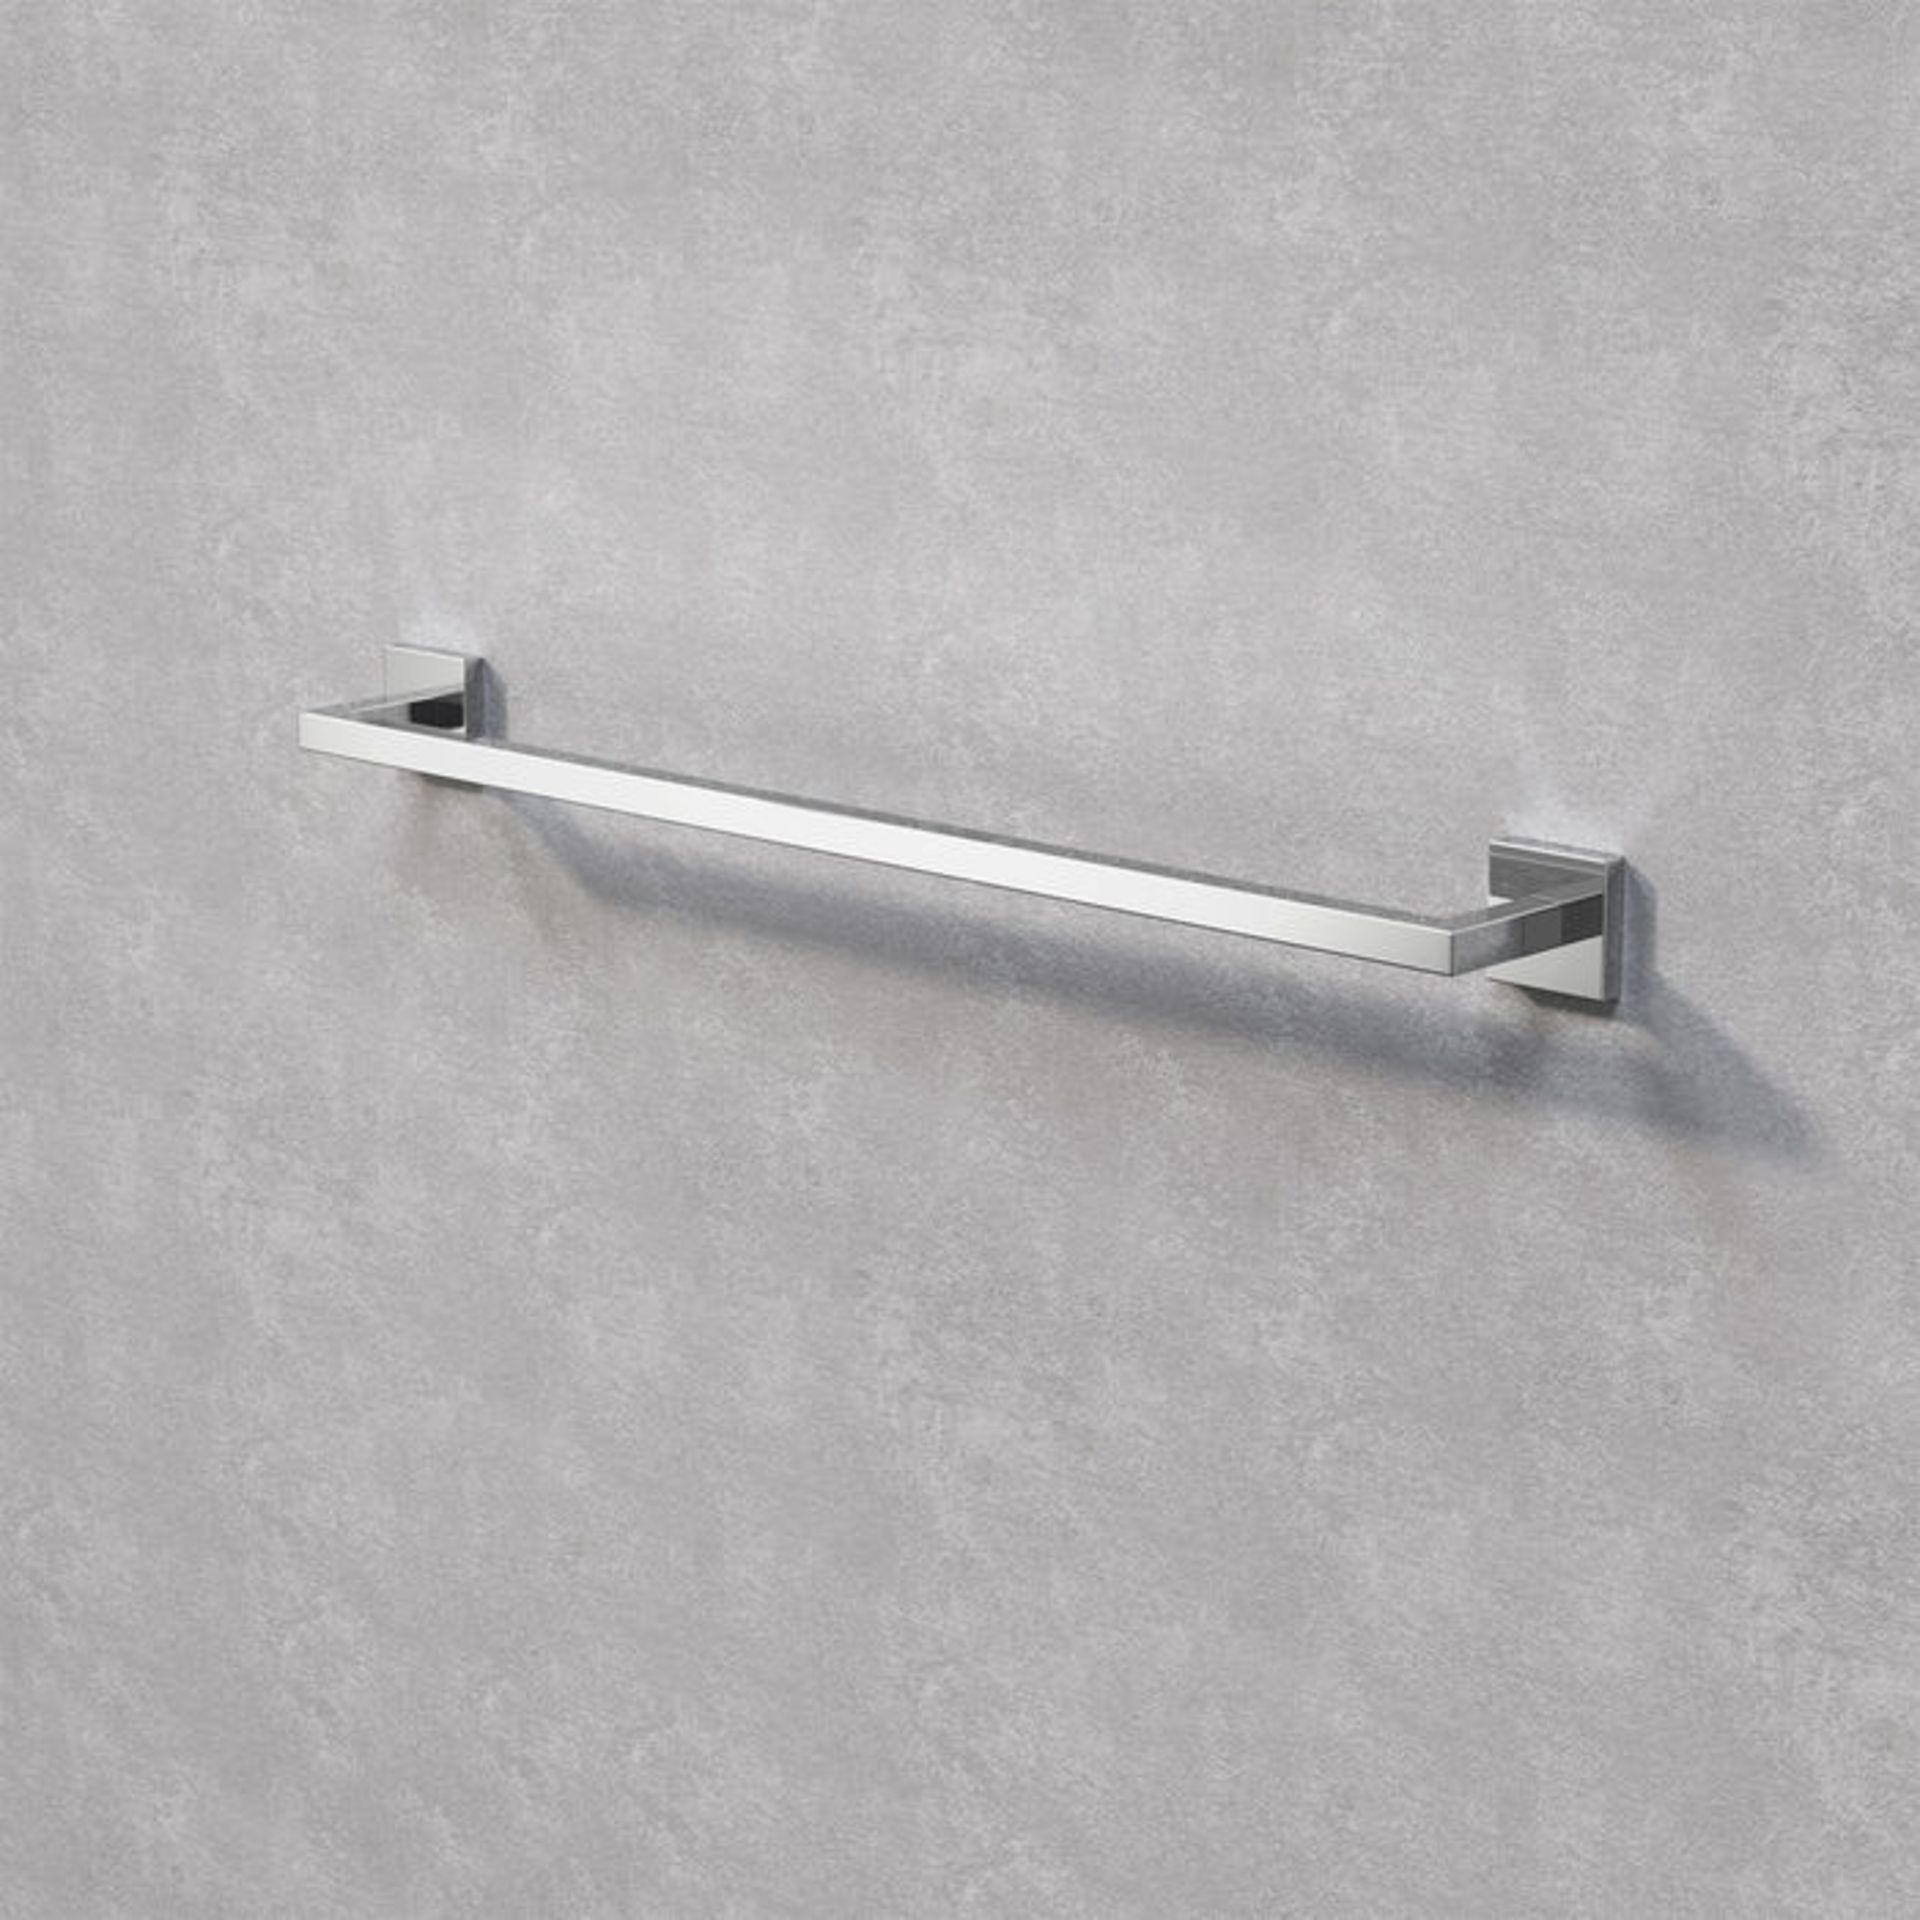 (NF110) Jesmond Towel Rail Finishes your bathroom with a little extra functionality and style Made - Bild 3 aus 3